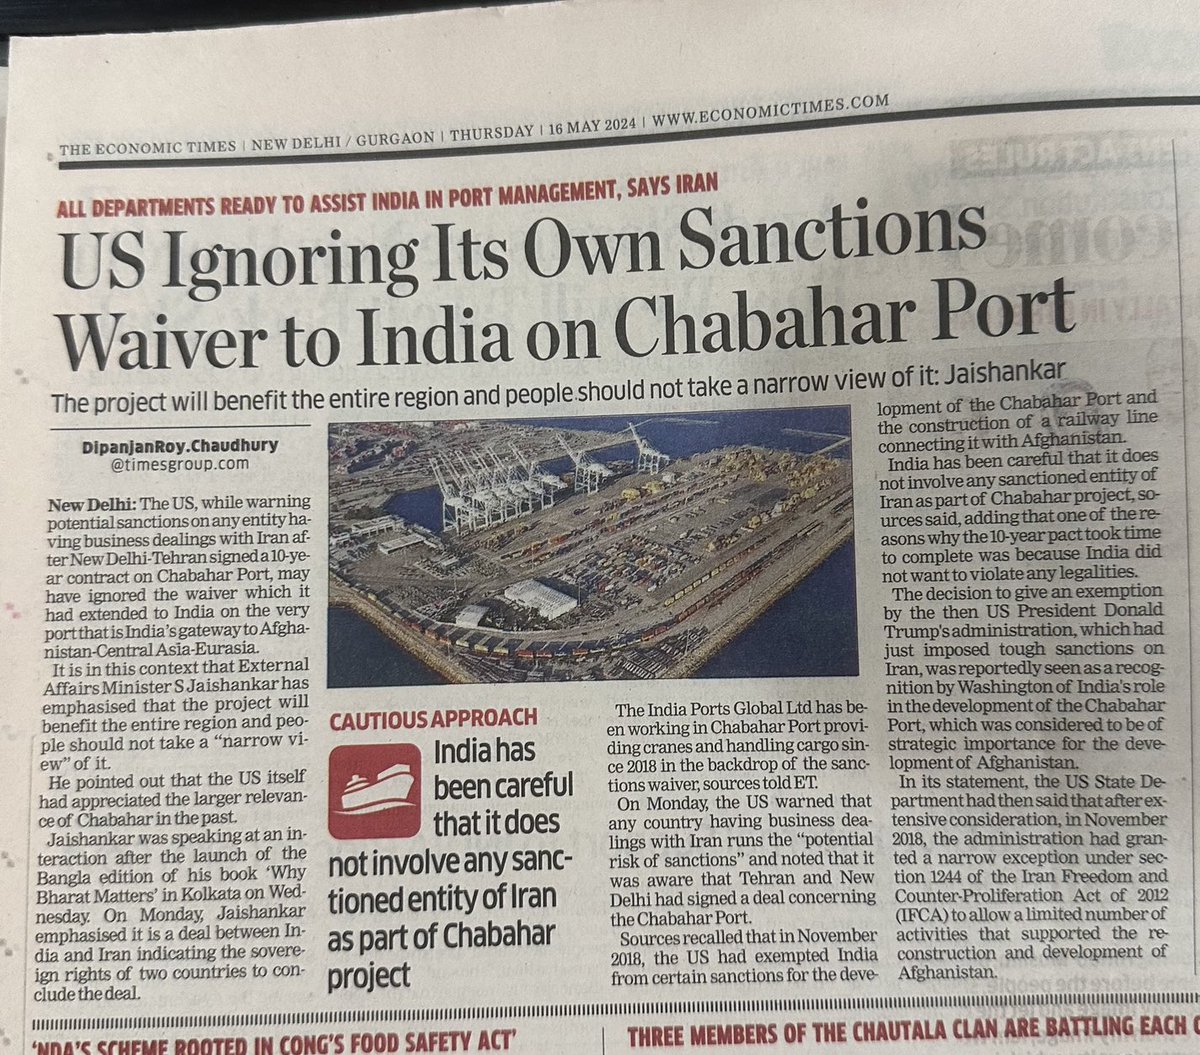 I write how USA is ignoring its own sanctions waiver to India for Chabahar Port given in 2018. India has been careful in not dealing with any sanctioned entity of Iran for Chabahar complex. Jaishankar points out the port serves larger regional interests ⁦@pranabsamanta⁩